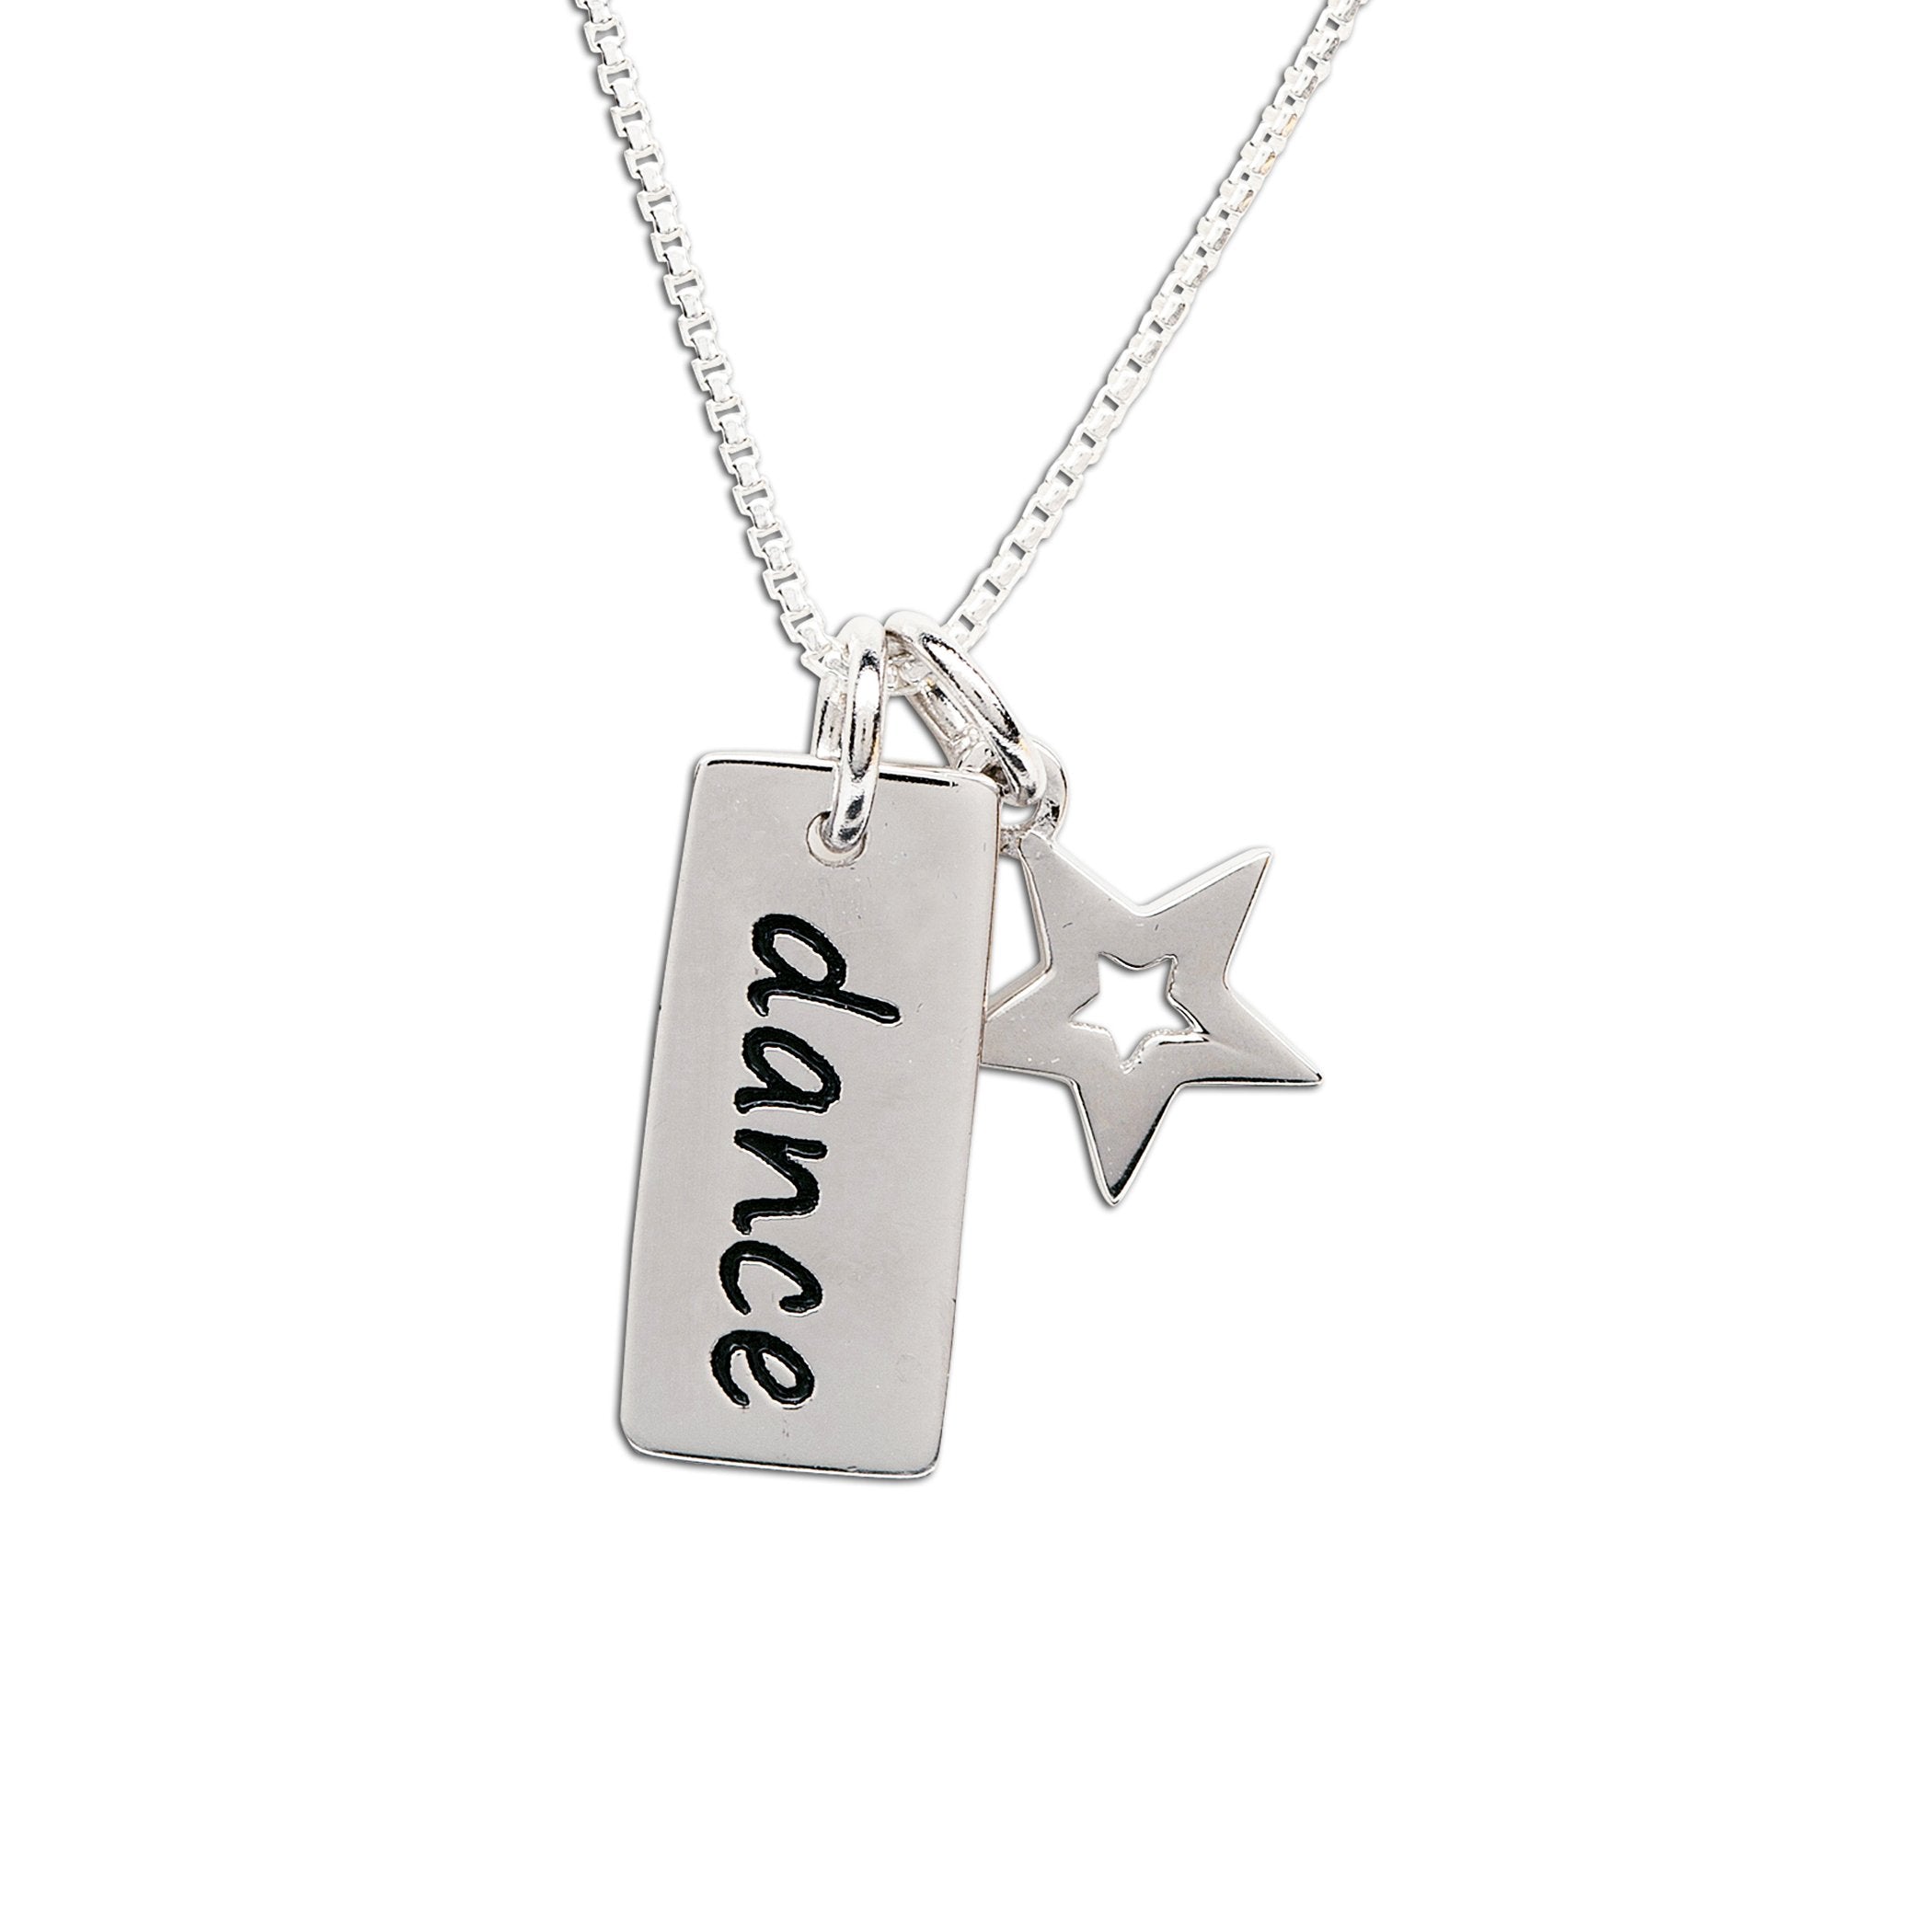 Cherished Moments- Sterling Silver Charm Necklaces